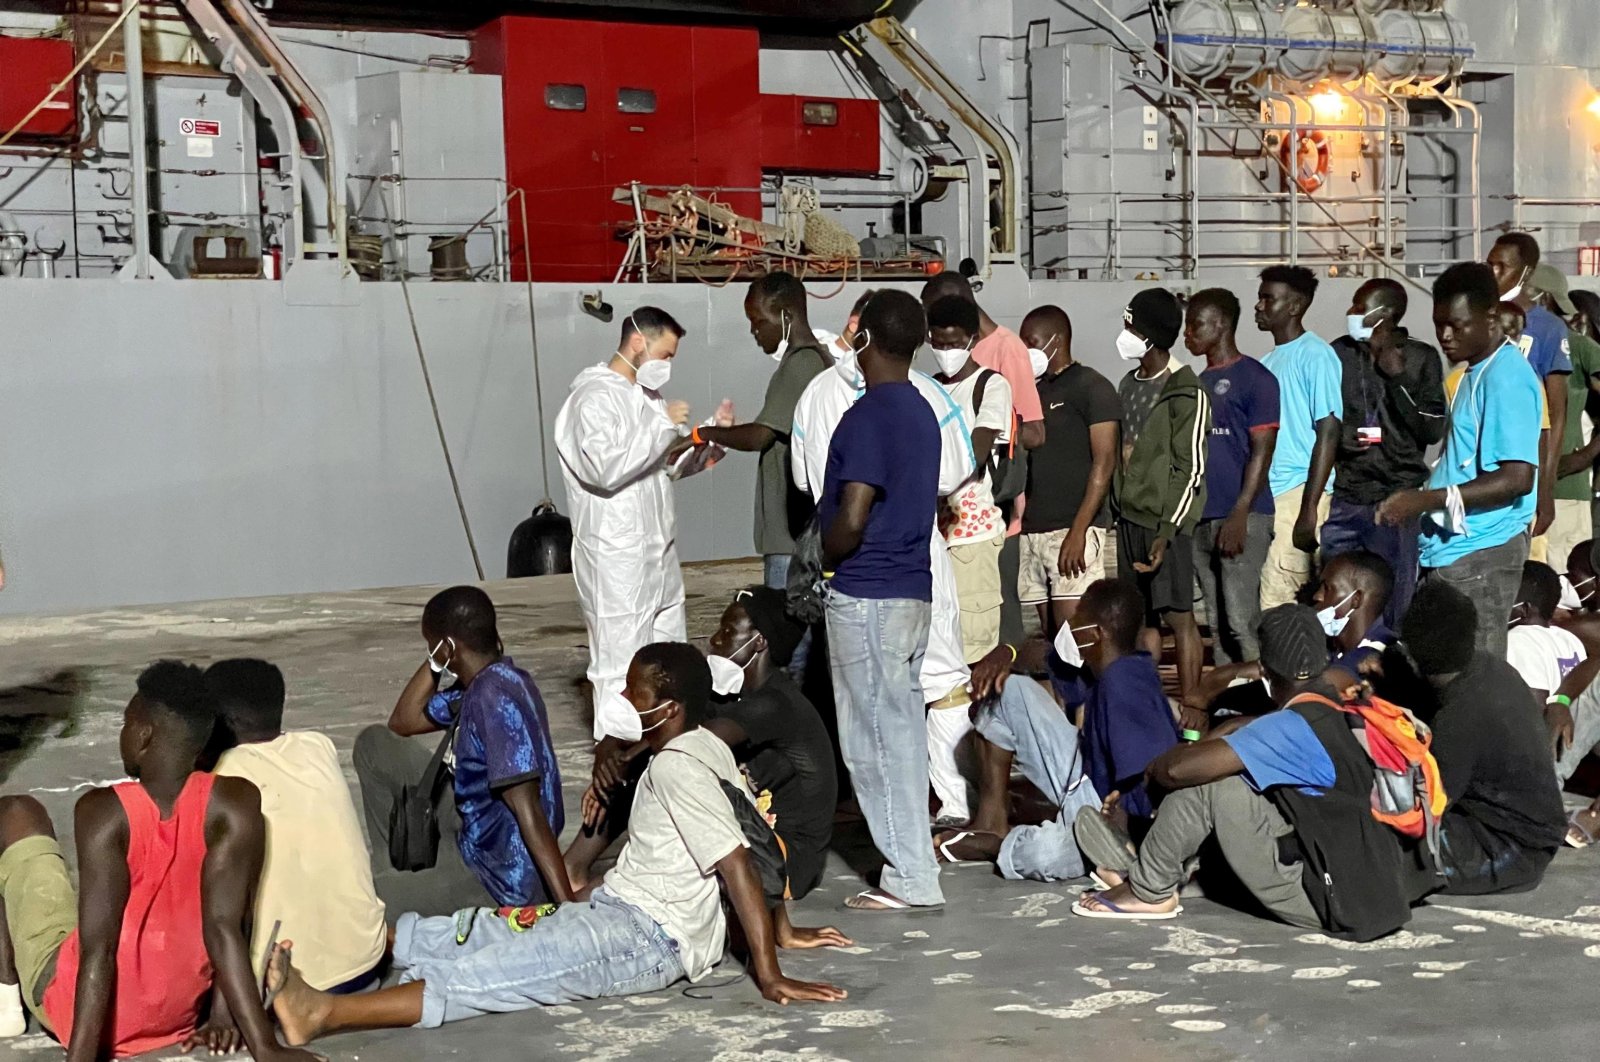 31 migrants missing following shipwreck off Italy amid stormy seas